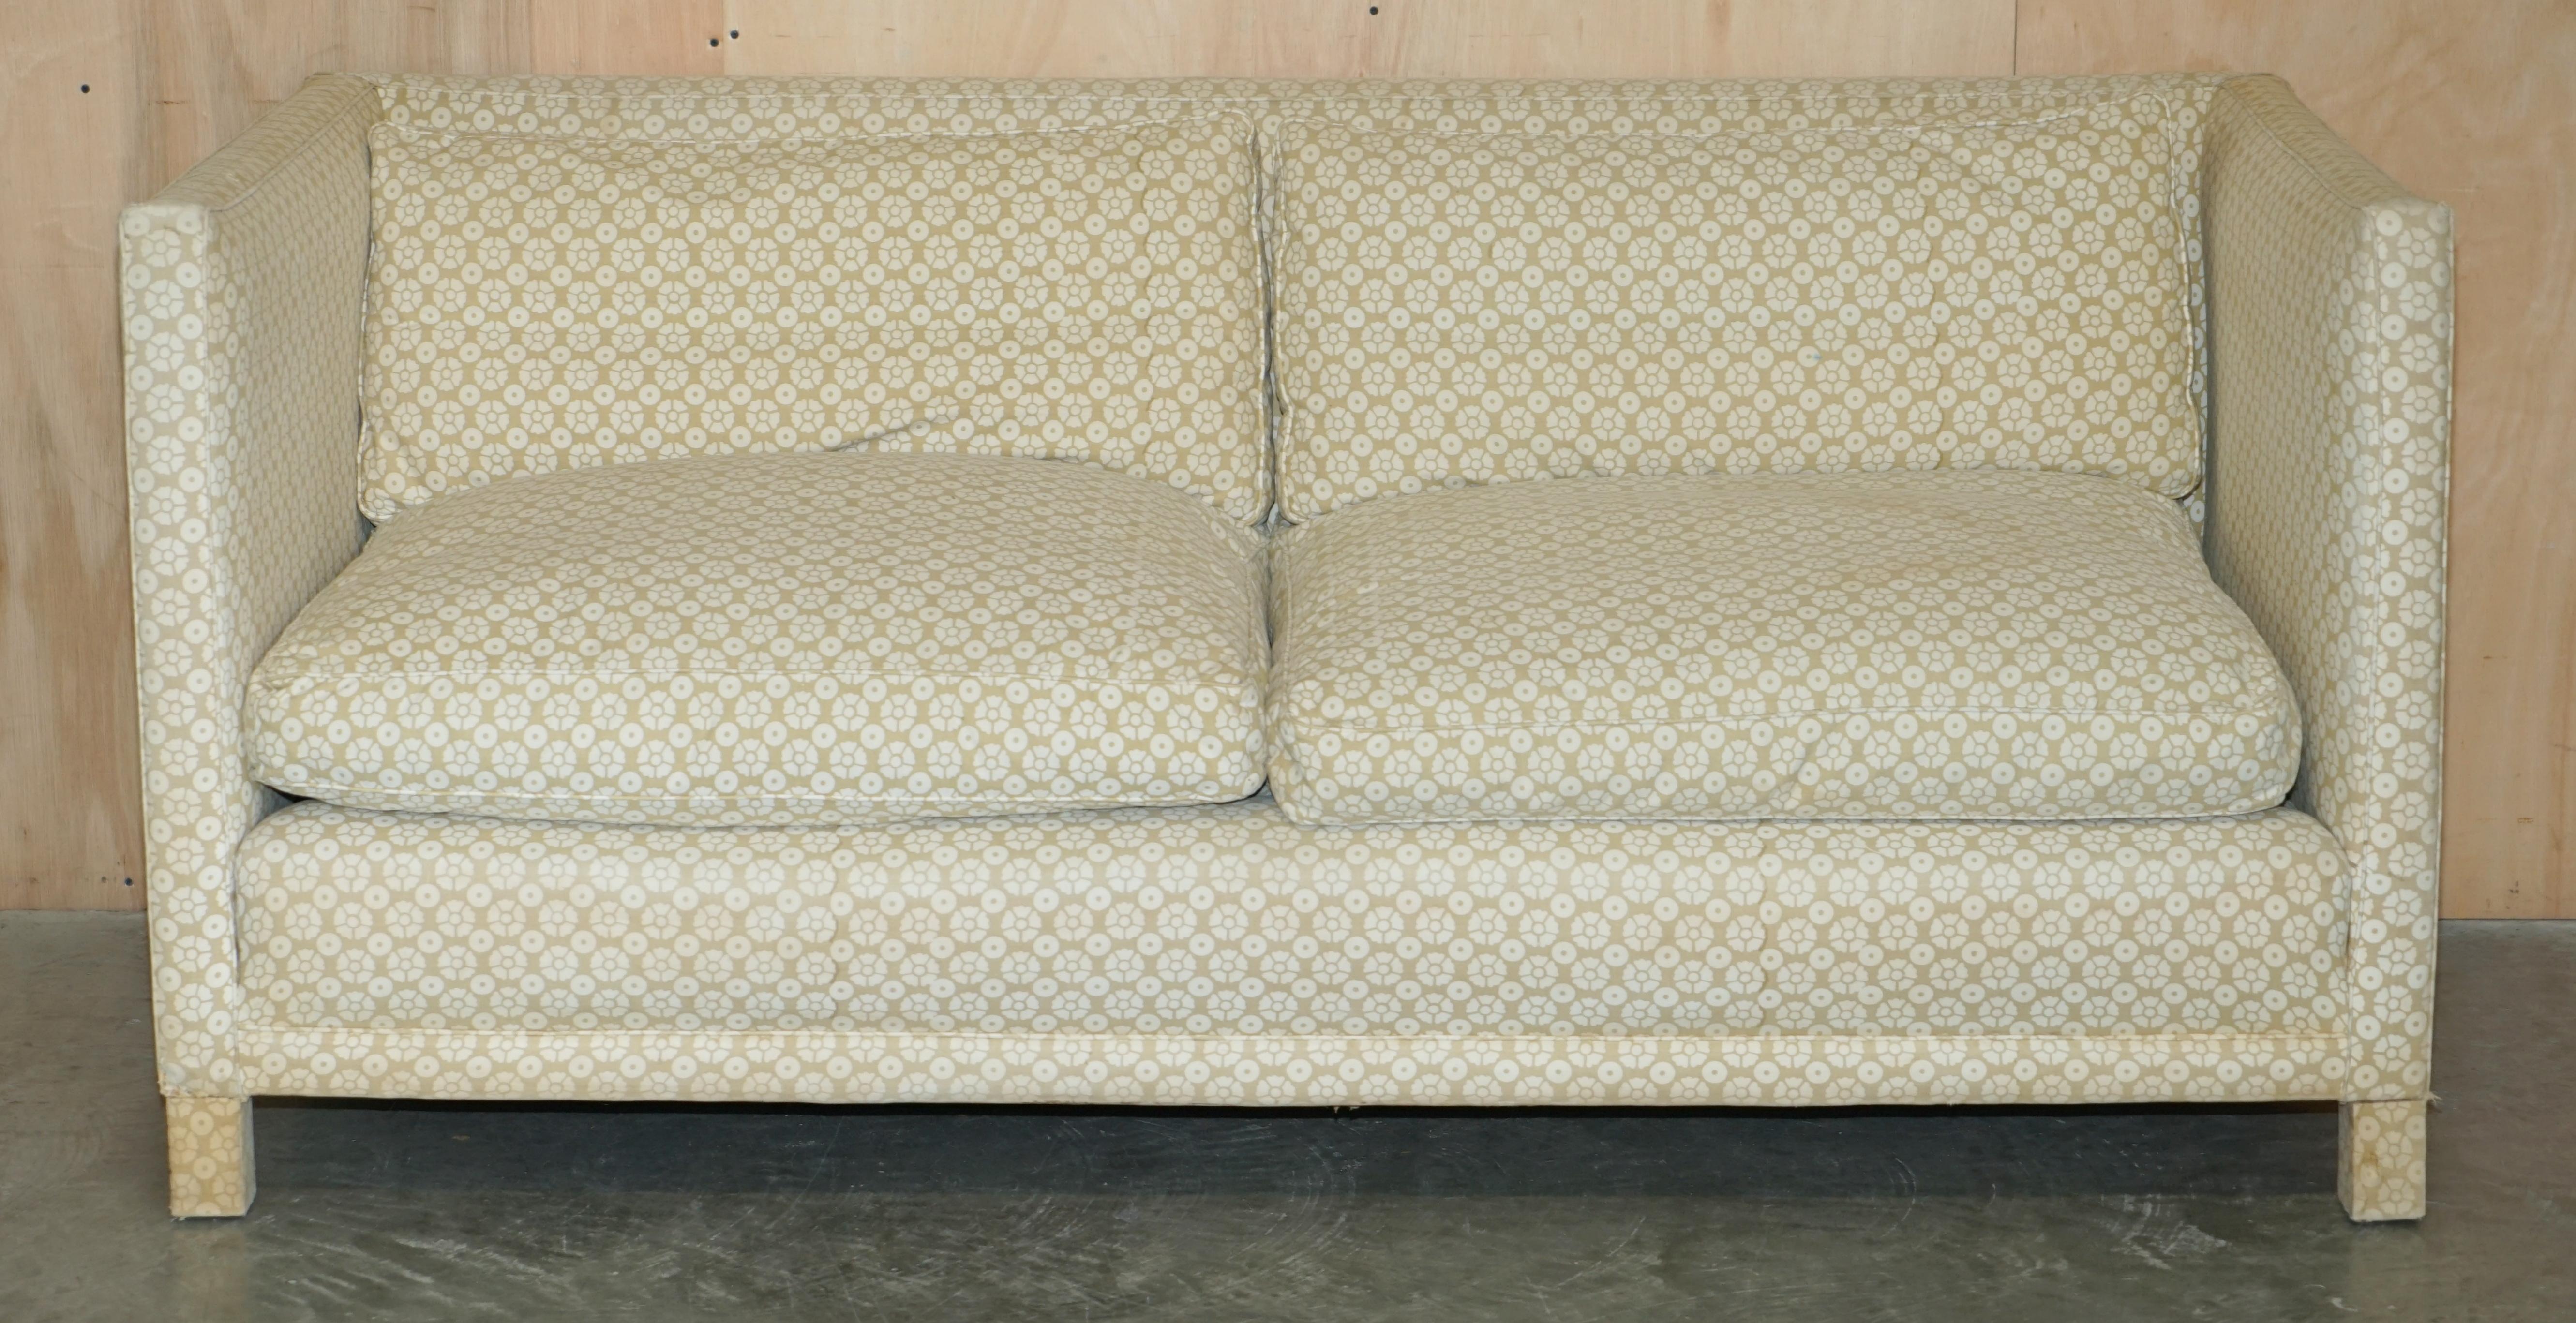 Royal House Antiques

Royal House Antiques is delighted to offer for sale one of two, very rare and important original 1969 David Hicks Paire De Canapes, Vers sofas in the original ticking fabric

Please note the delivery fee listed is just a guide,